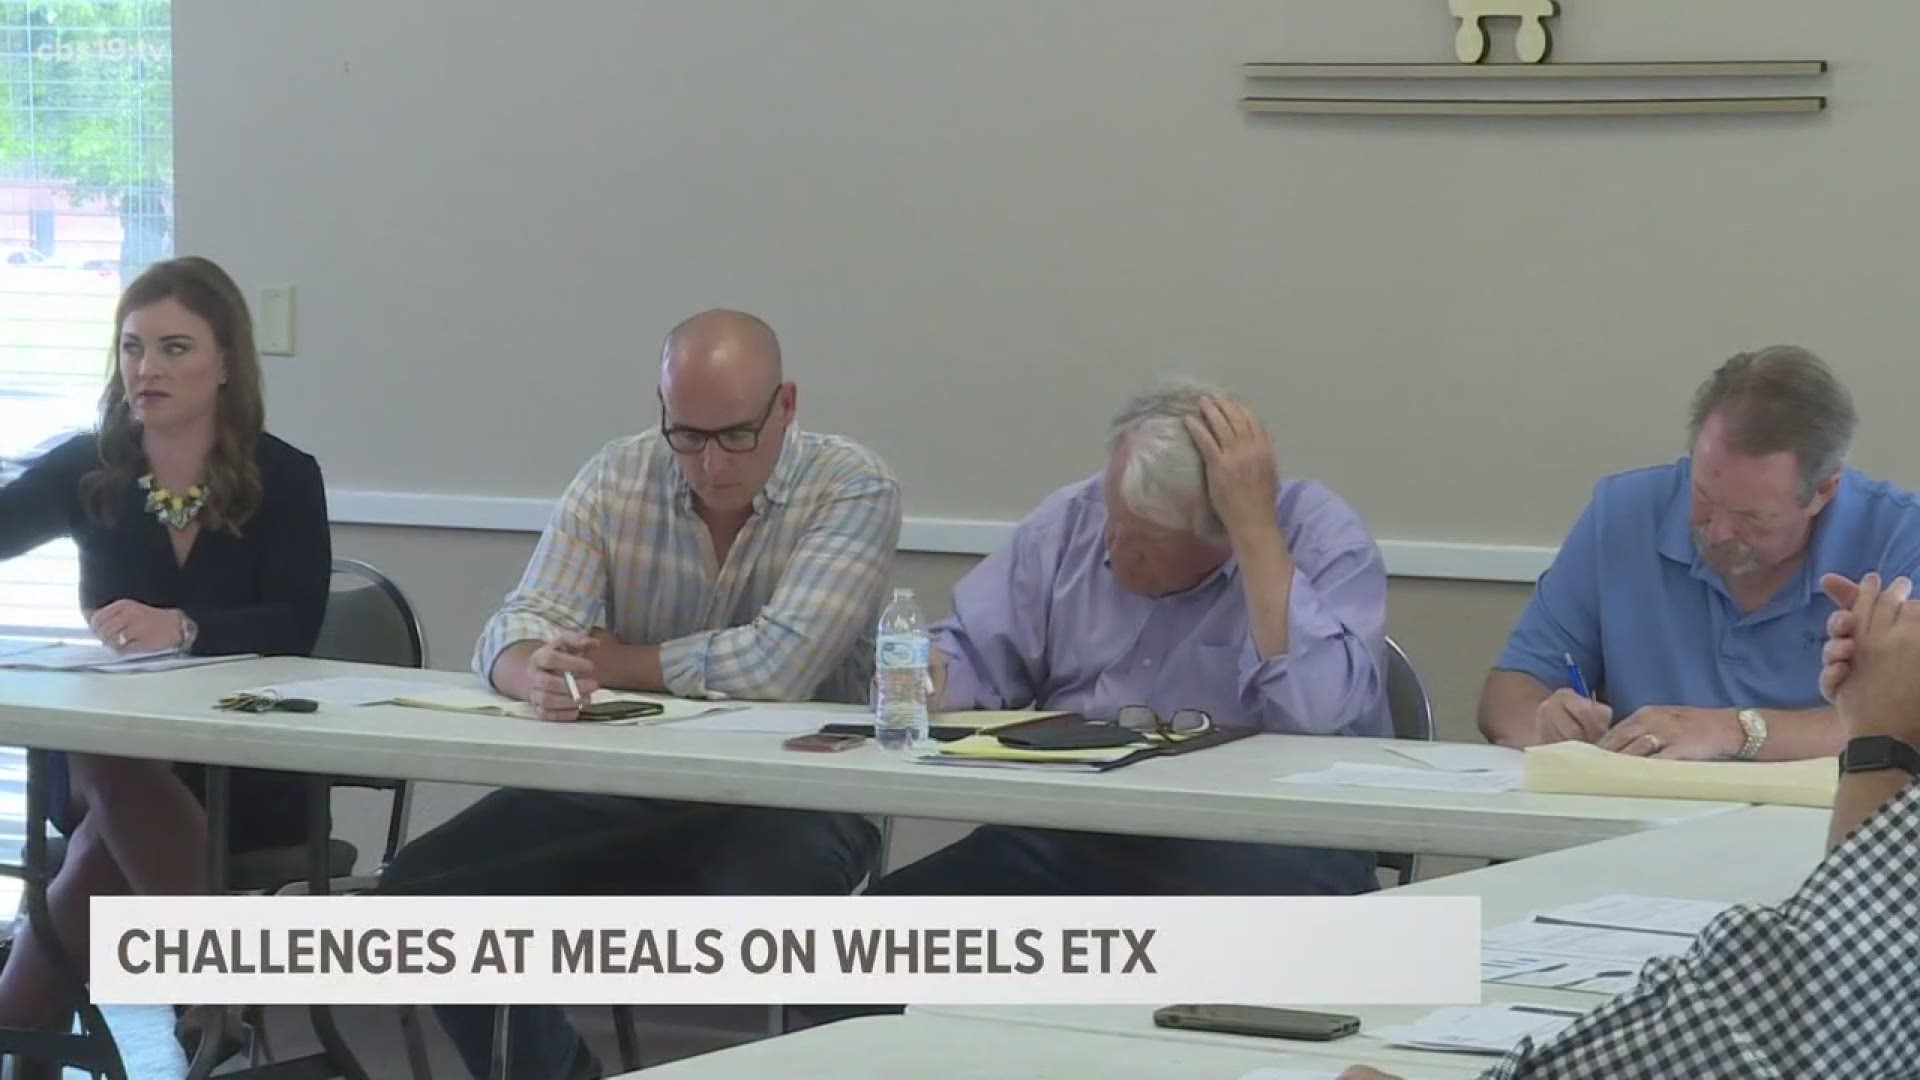 In recent weeks, employees and public records have demonstrated challenges facing Meals on Wheels East Texas related to employee turnover, finance and administration.